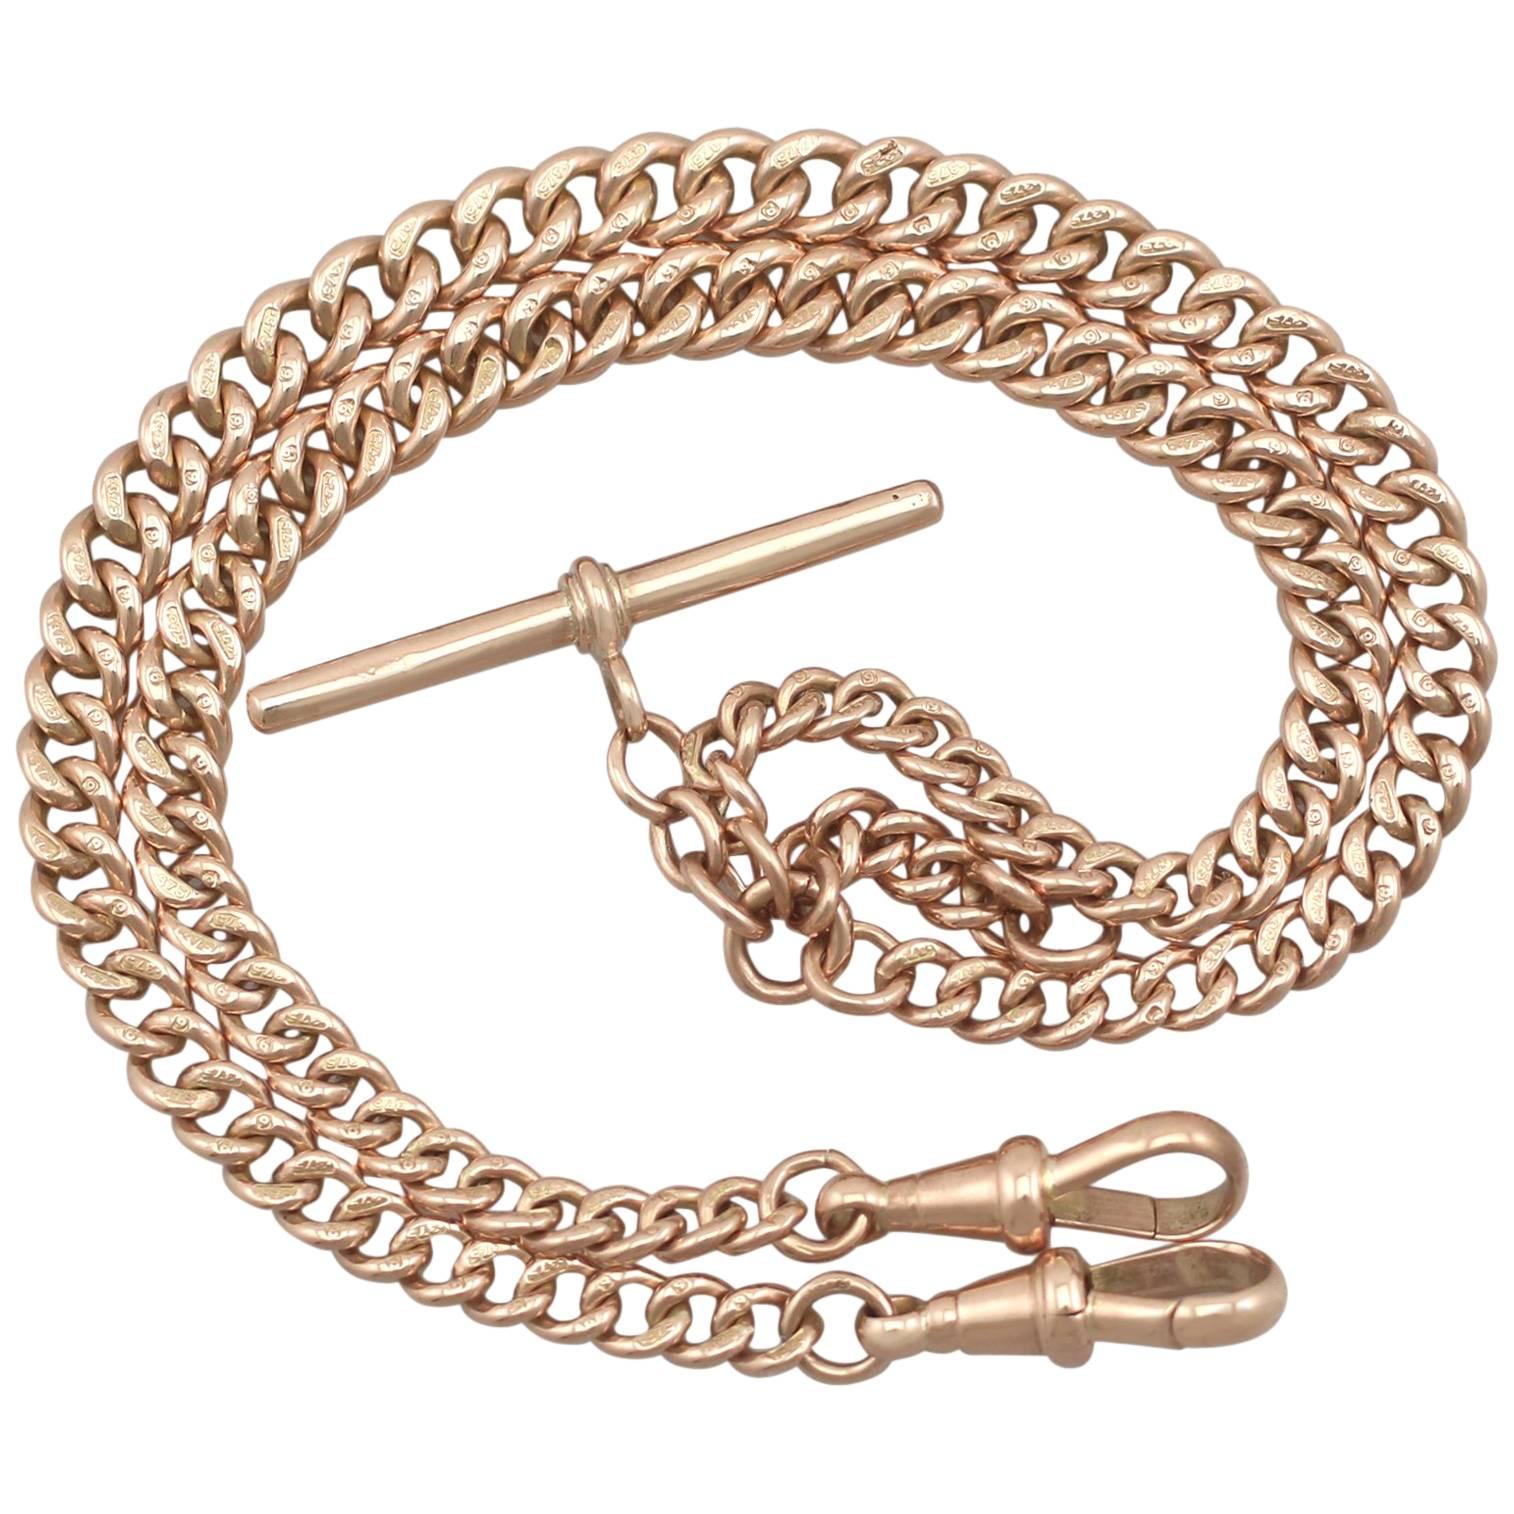 1900 Antique Rose Gold Double Albert Watch Chain